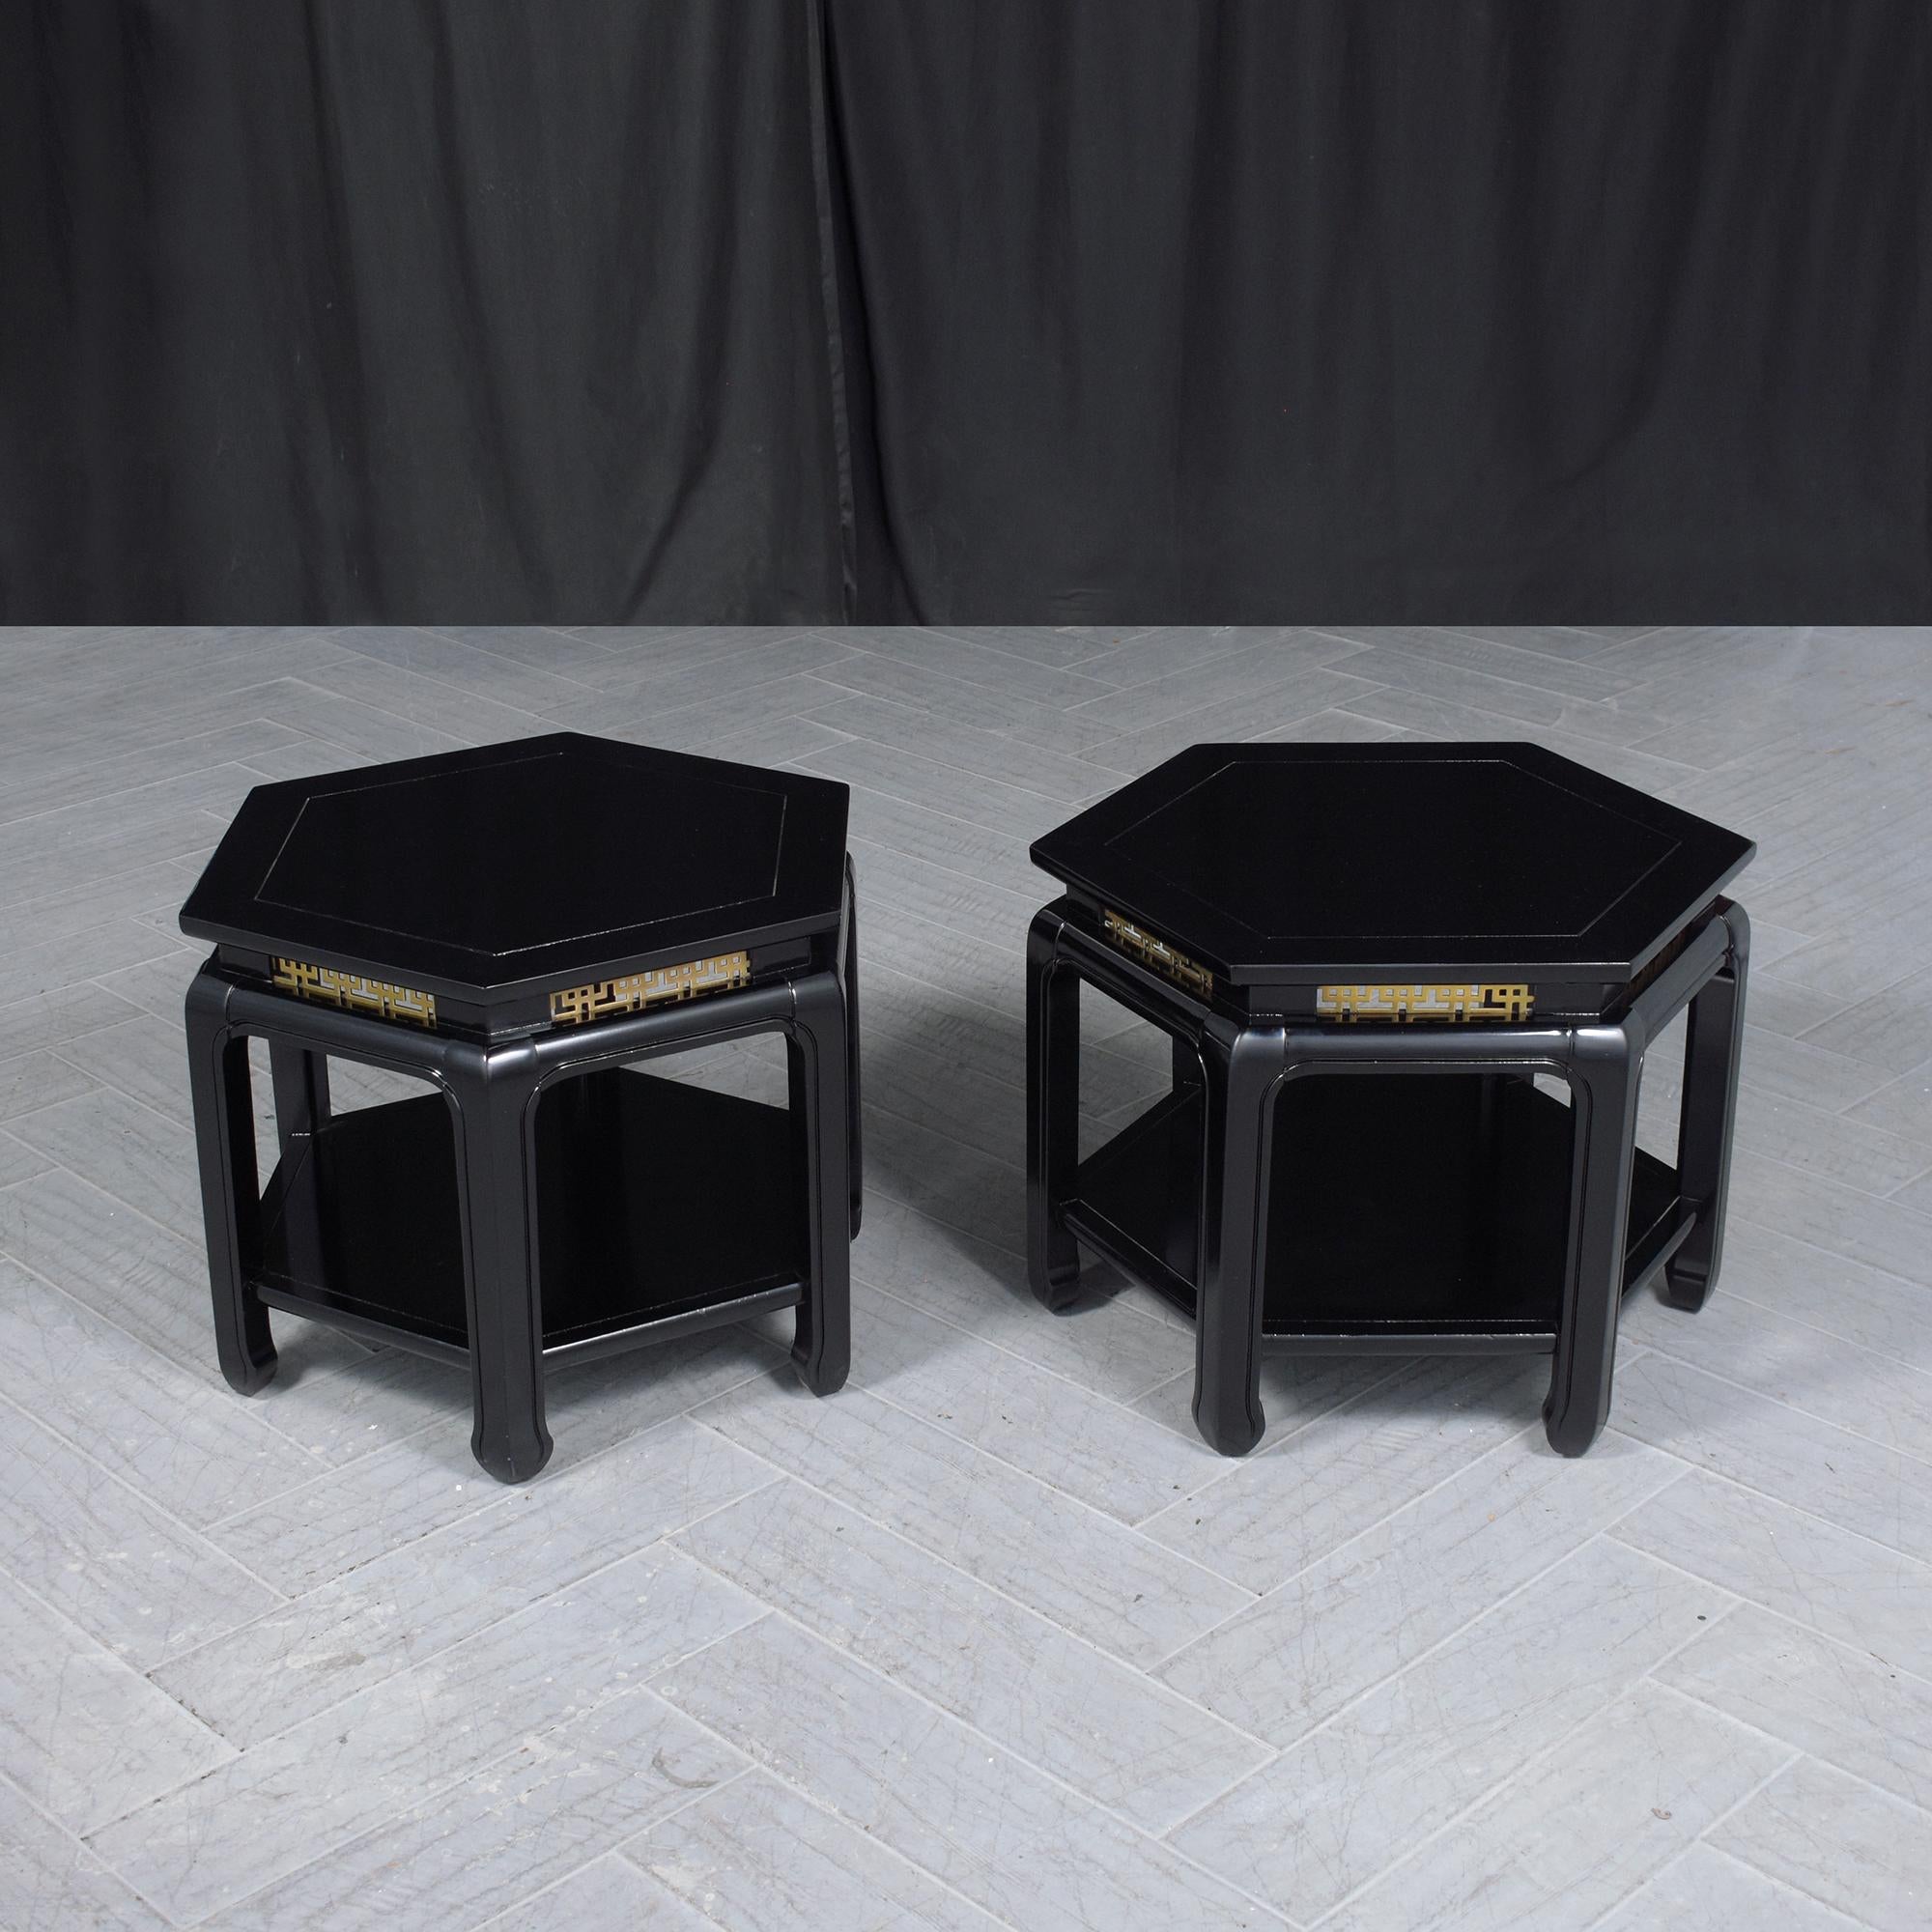 Step into the world of vintage luxury with our elegant pair of hexagon side tables, a masterful creation from the renowned J.B. Van Sciver Co. from the 20th century. These tables, having undergone a fresh ebonizing process, now boast a deep, rich